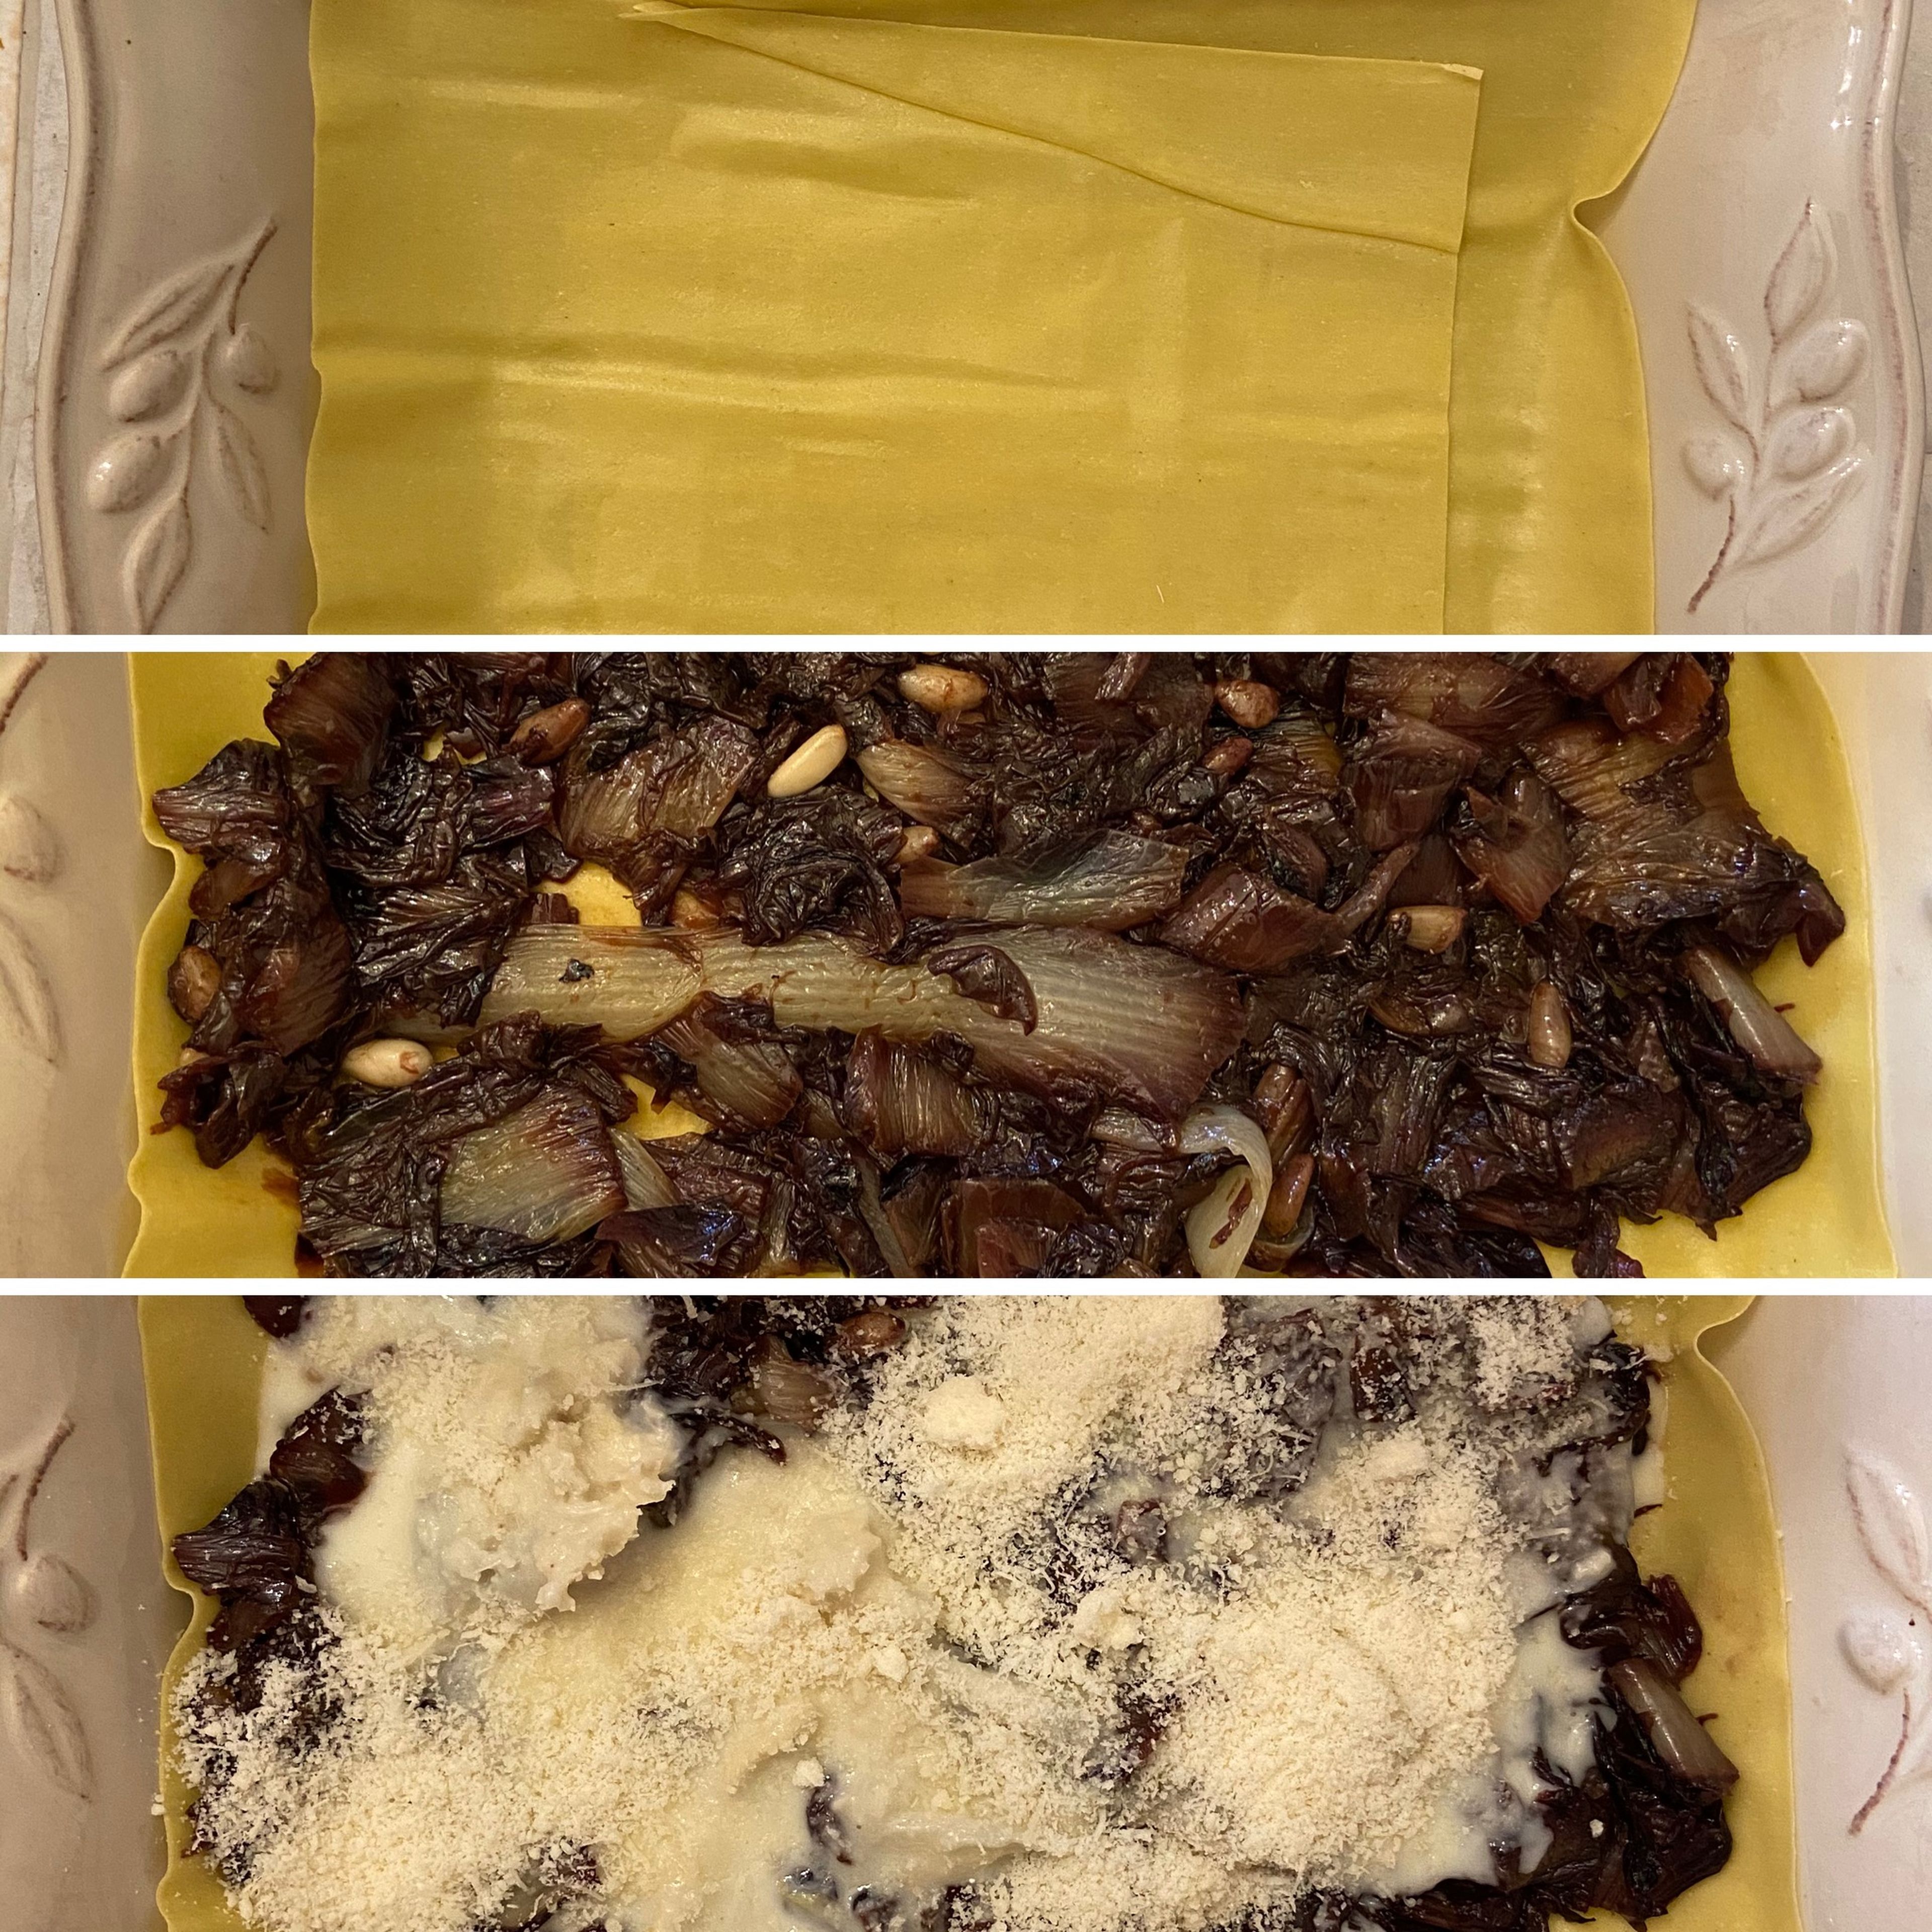 Let’s start layering our lasagne: place a couple of lasagne pasta sheets on a baking pan. Then add the pre-cooked radicchio. Finally add a layer of Gorgonzola sauce and Parmesan cheese. Repeat the layers for a couple of times.